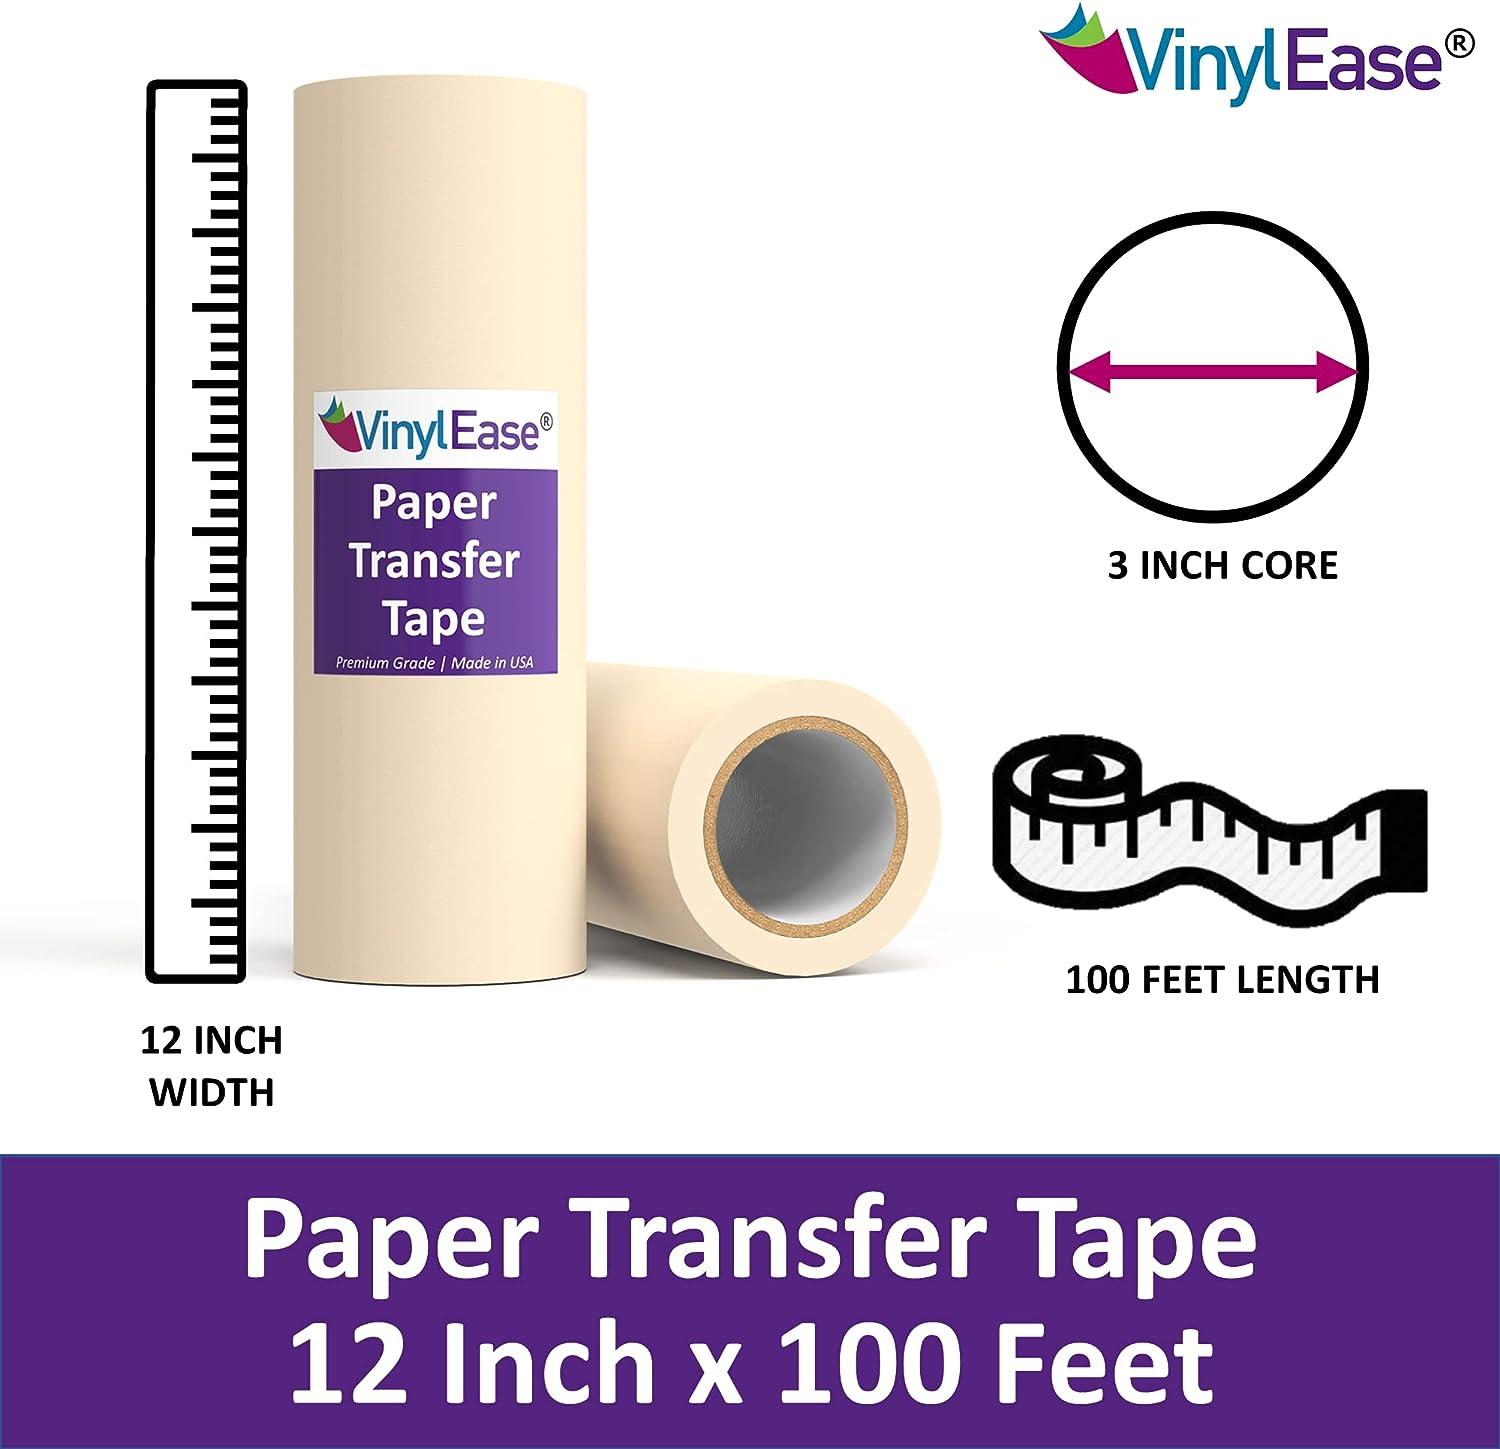 Vinyl Ease 12inch x 100 feet roll of Paper Transfer Tape with a Medium to  High Tack Layflat Adhesive. Works with a Variety of Vinyl. Great for Decals  Signs Wall Words and